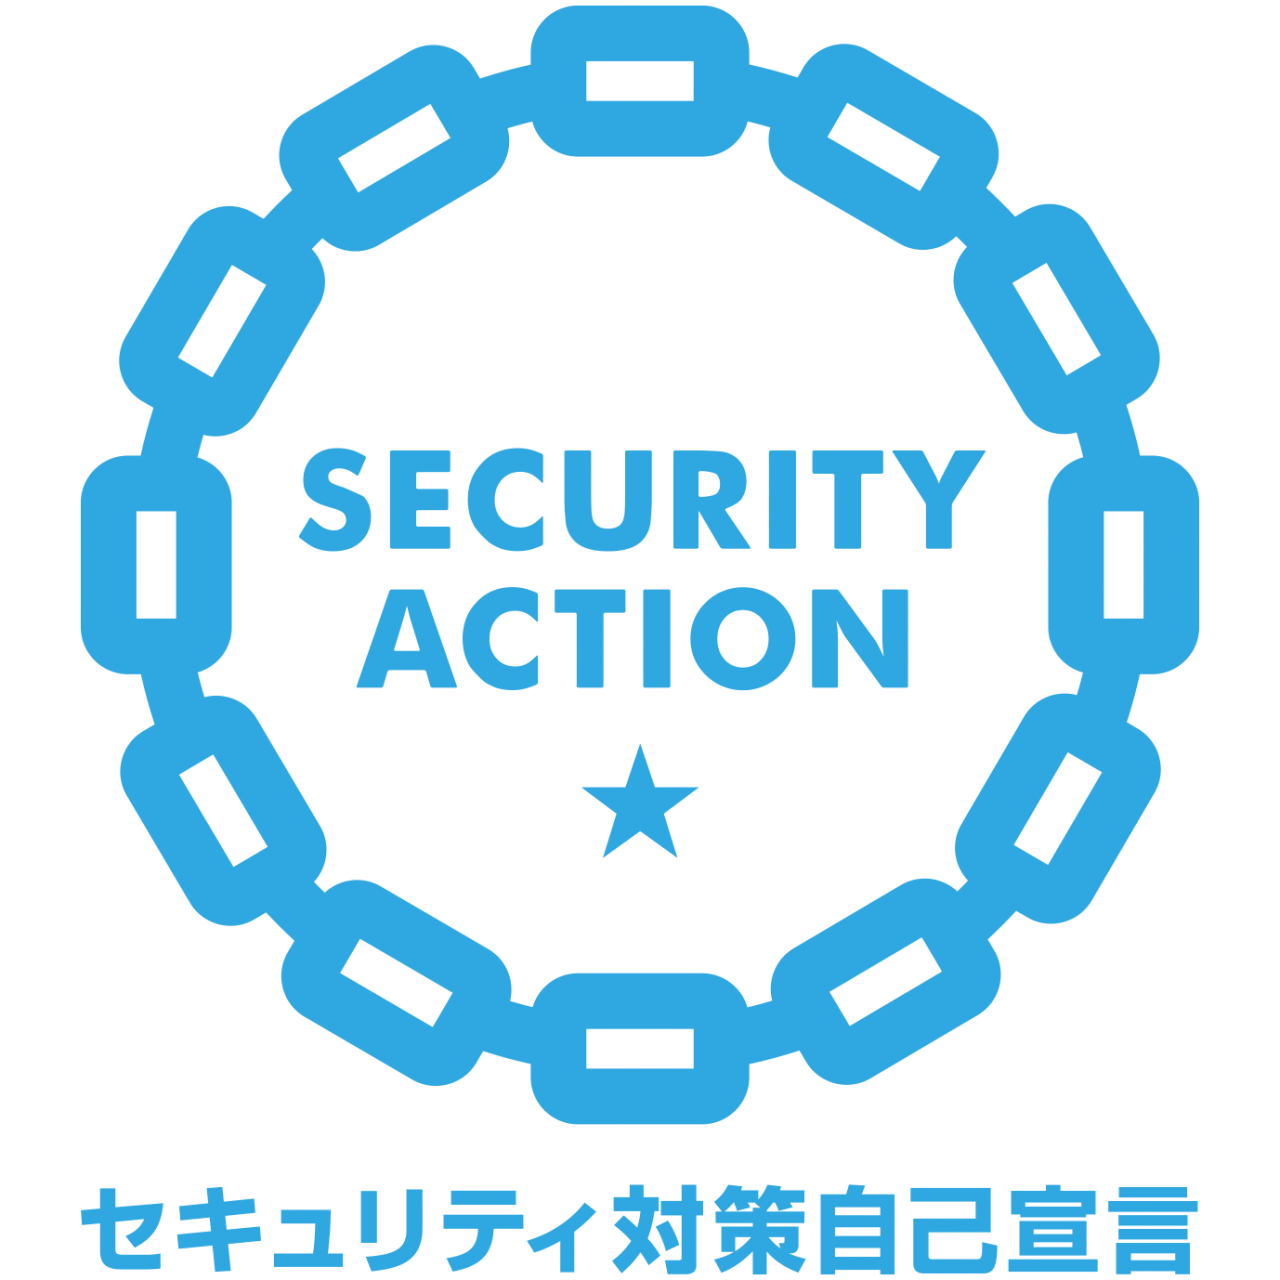 SECURITY ACTION 一つ星ロゴ